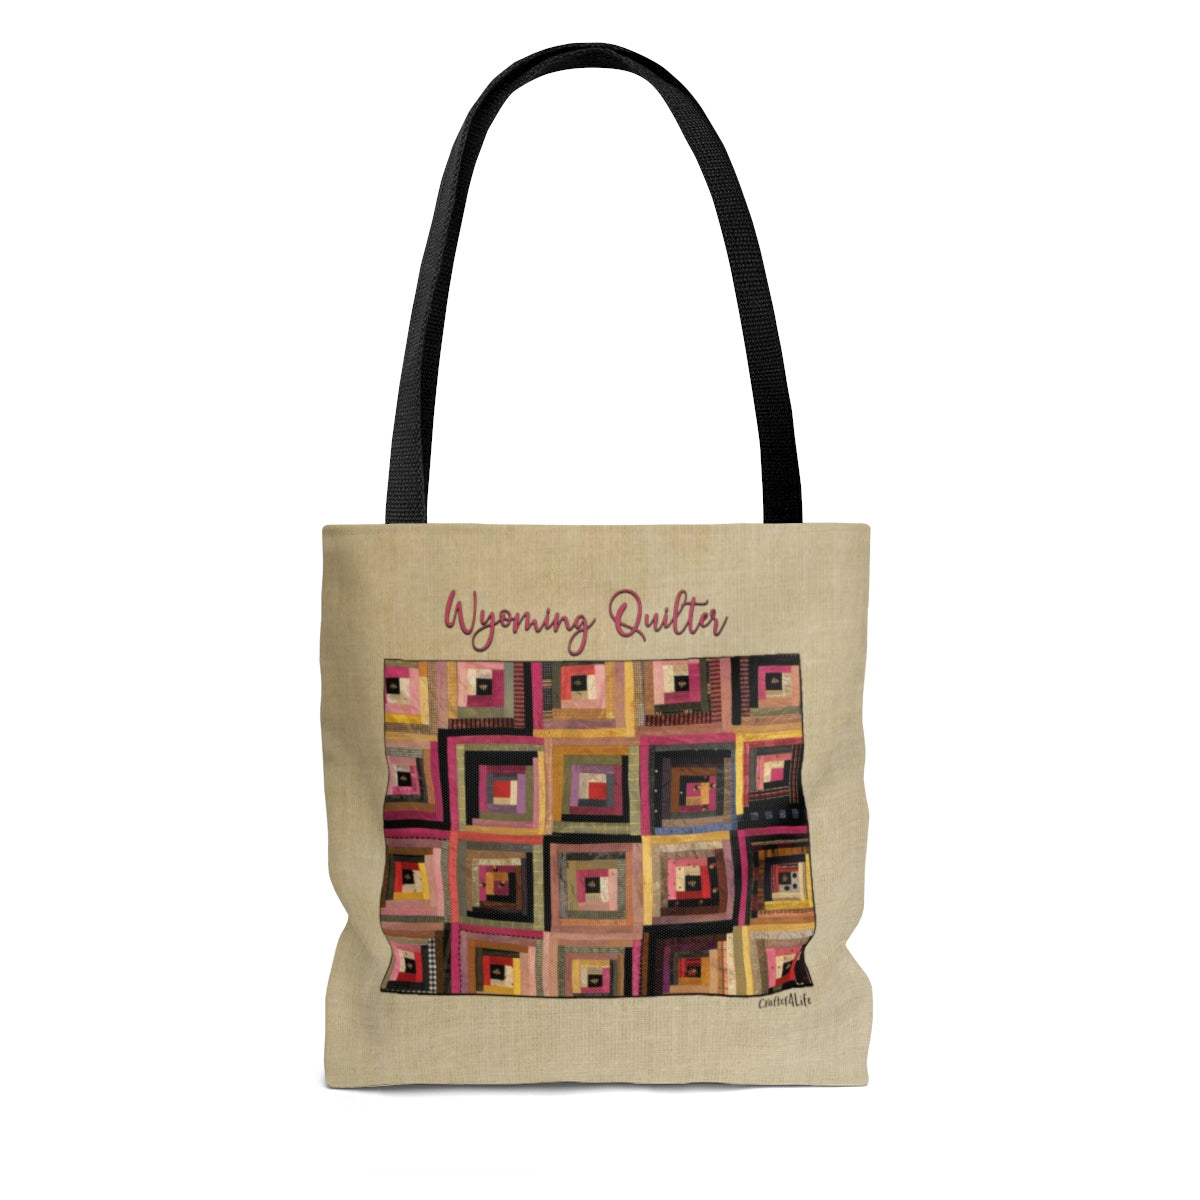 Wyoming Quilter Cloth Tote Bag